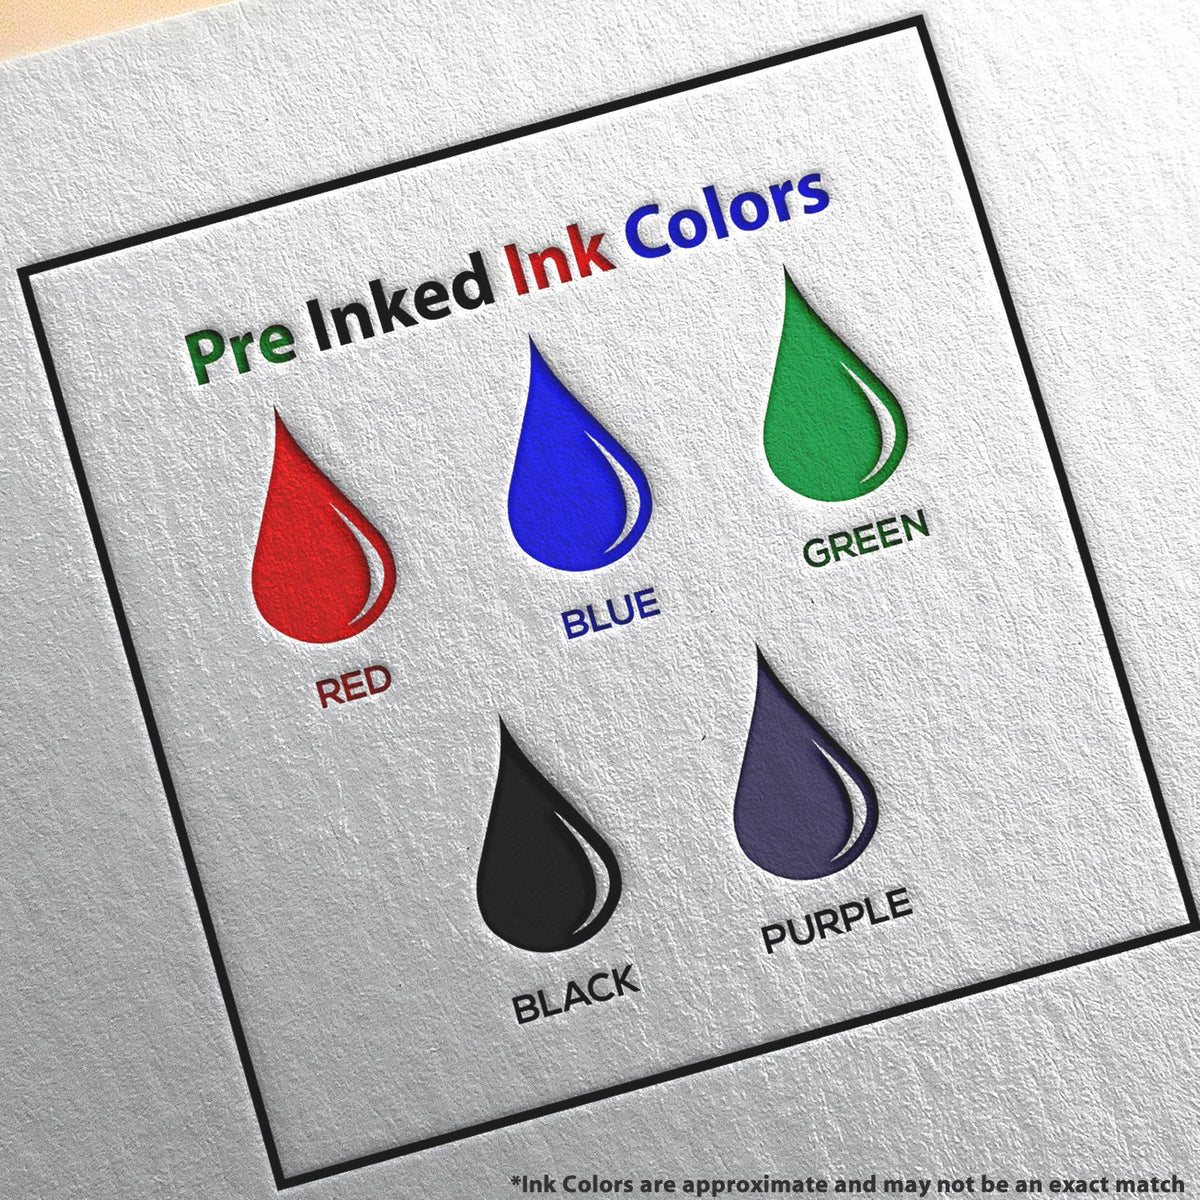 A picture showing the different ink colors or hues available for the Premium MaxLight Pre-Inked New Hampshire Landscape Architectural Stamp product.